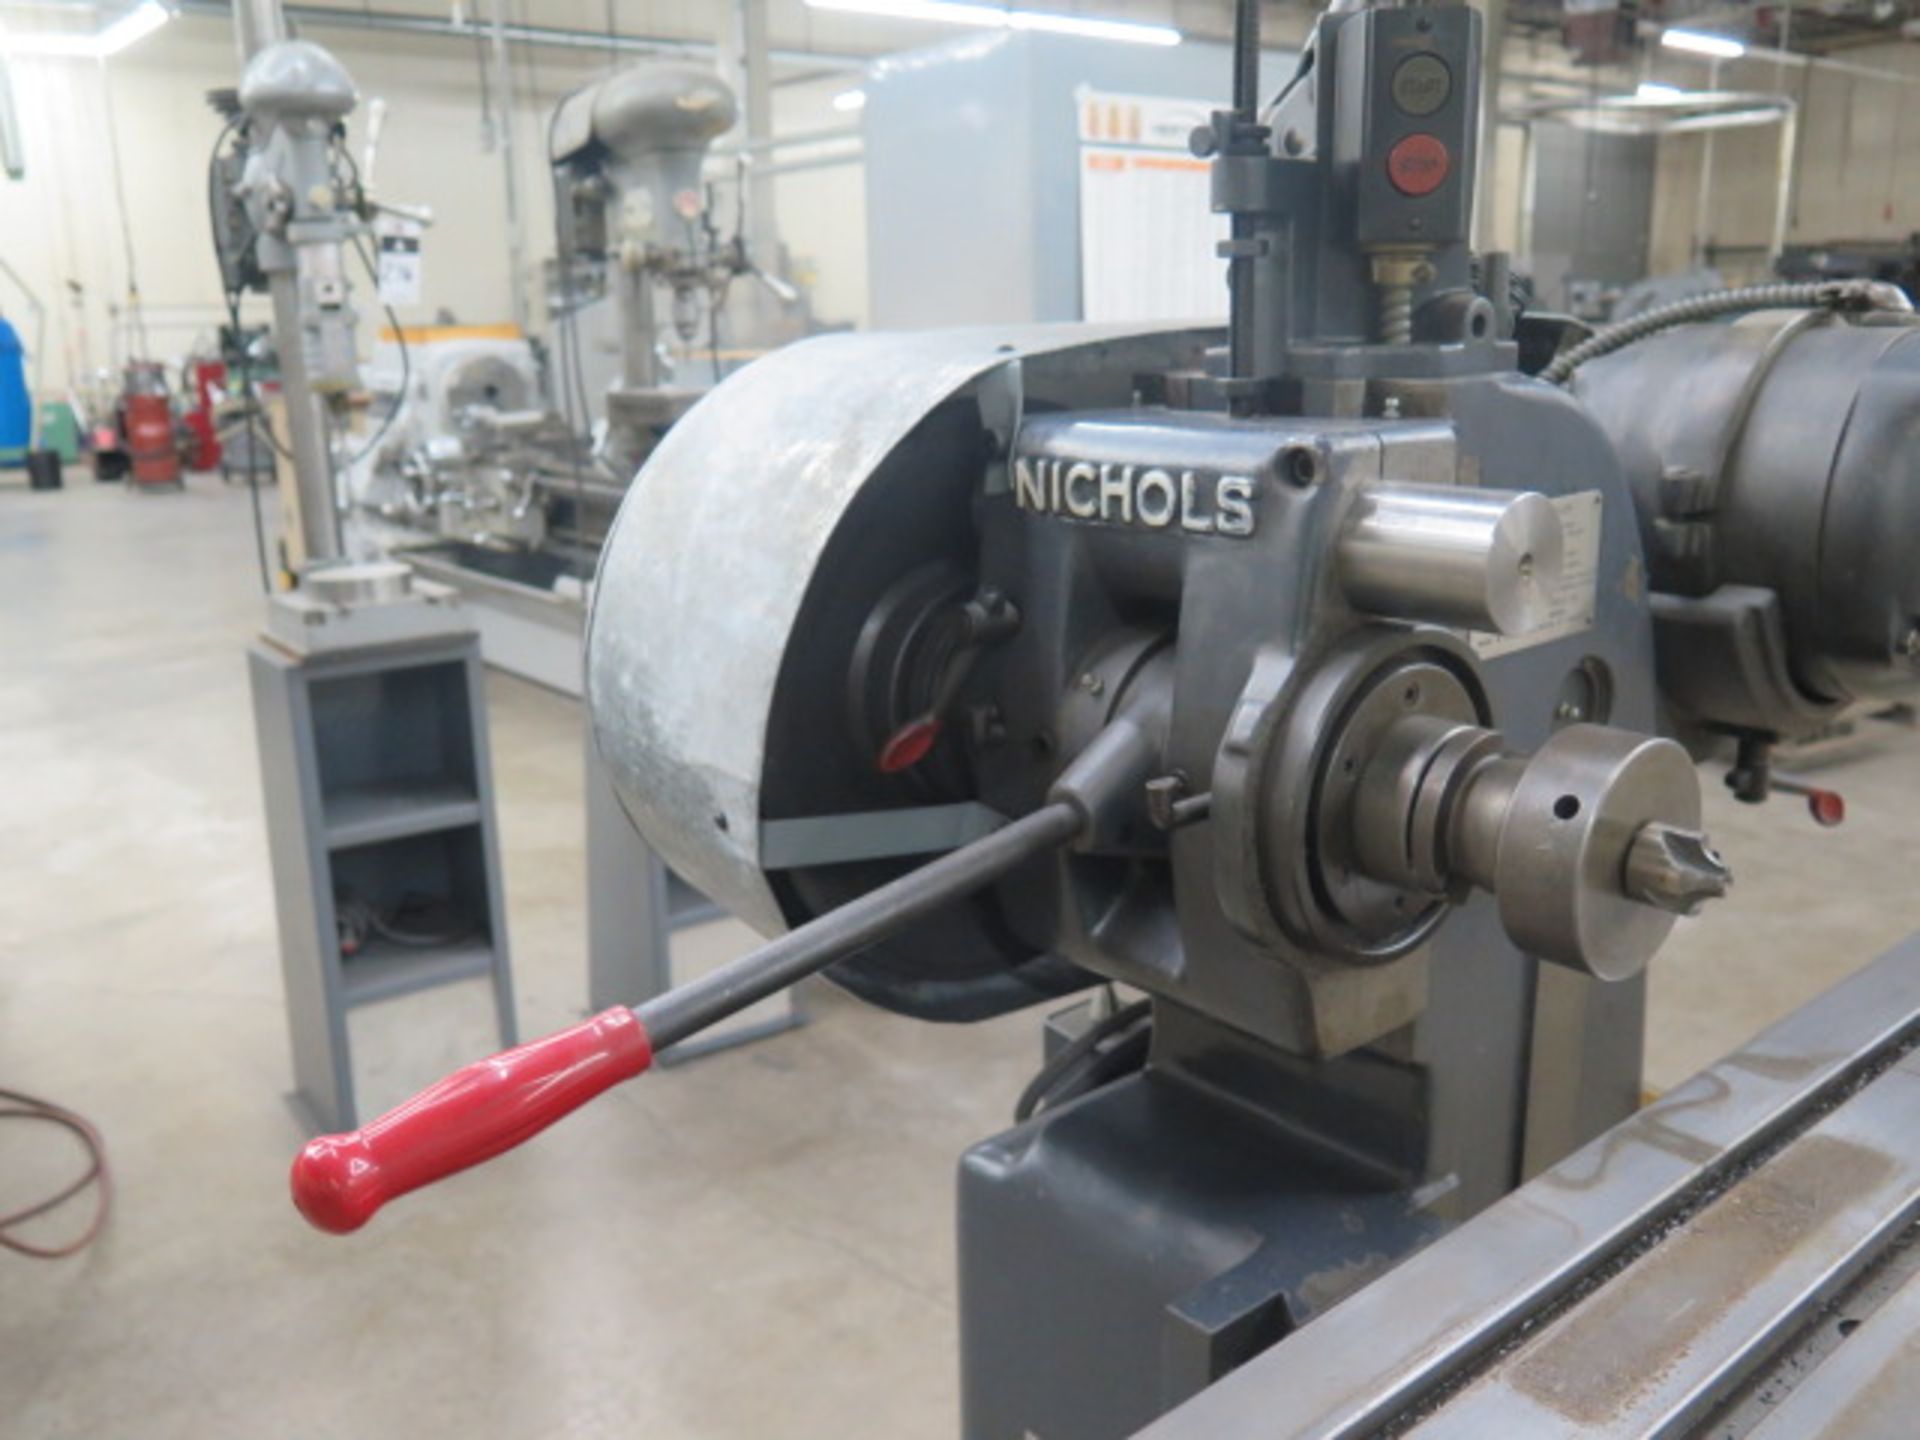 Nichols Horizontal Mill s/n 8-V-6241 w/ 5-Speeds, 40-Taper Spindle, 7 5/8” x 30” Table - Image 5 of 7